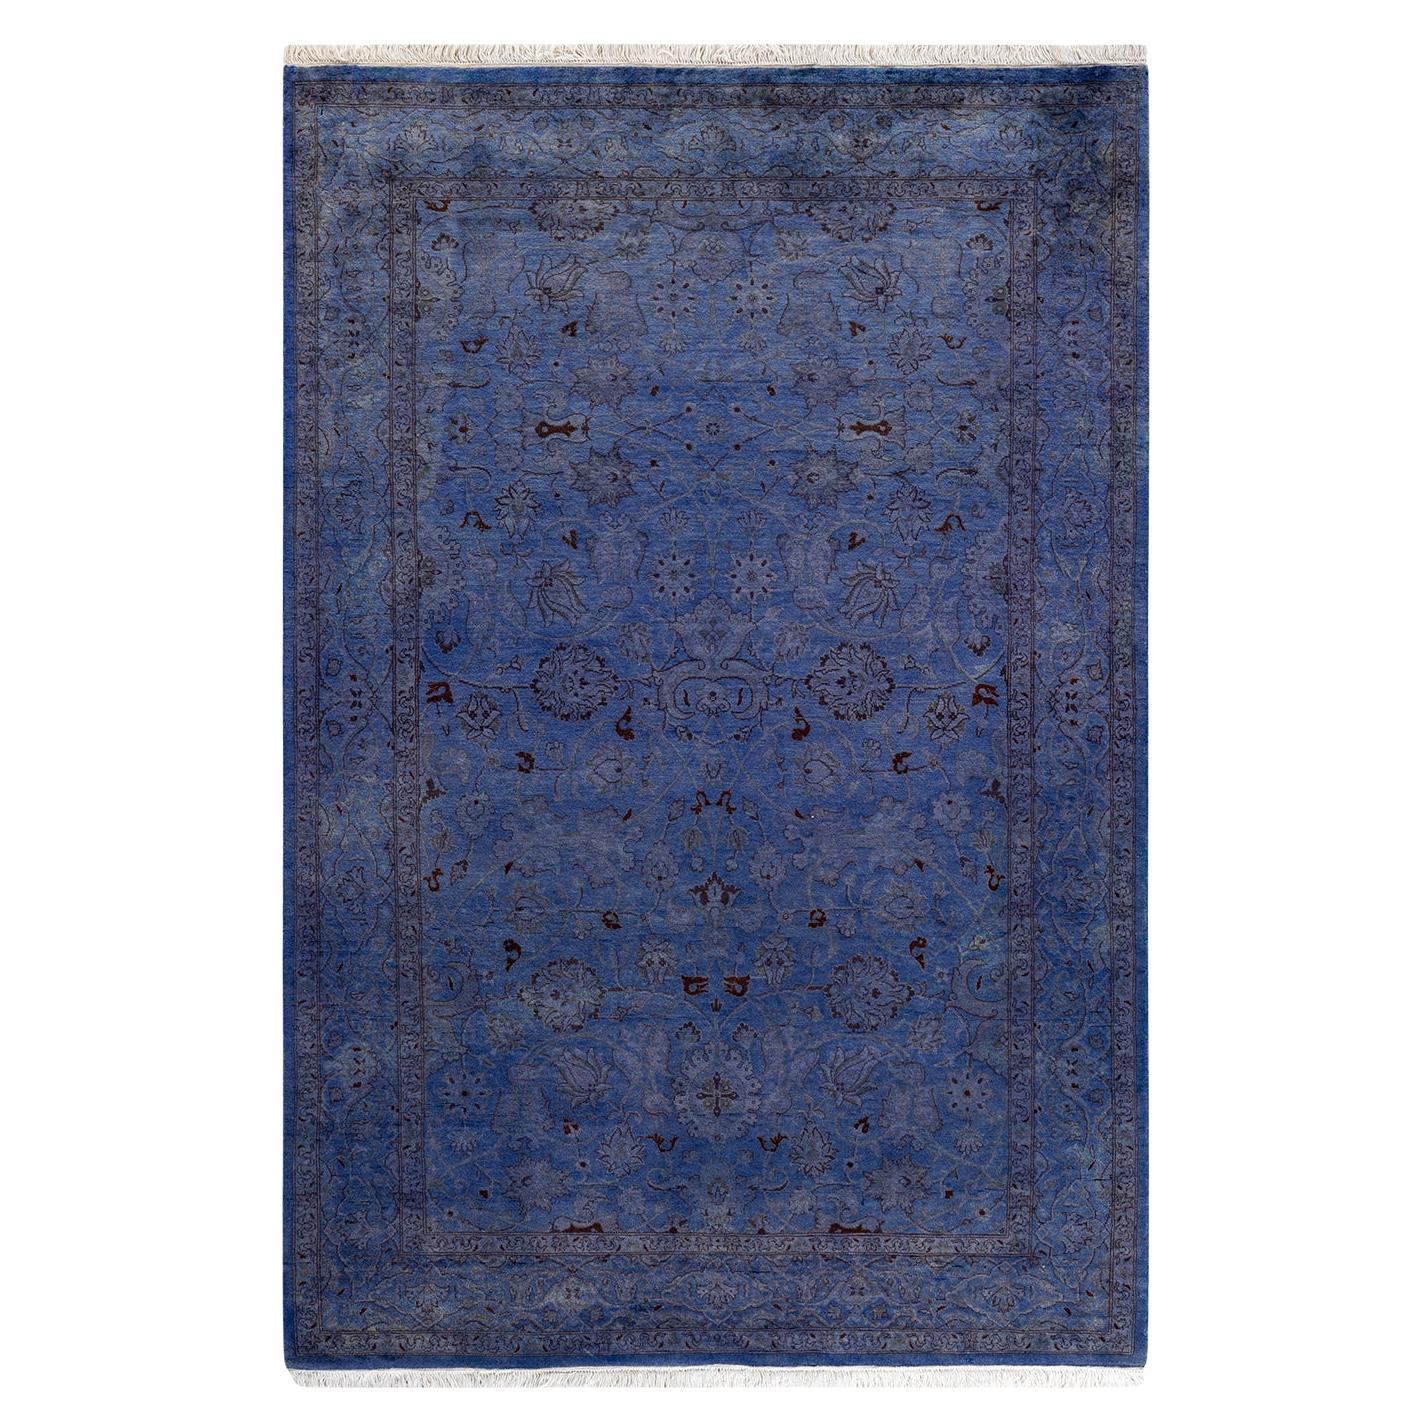 Contemporary Overdyed Hand Knotted Wool Purple Area Rug